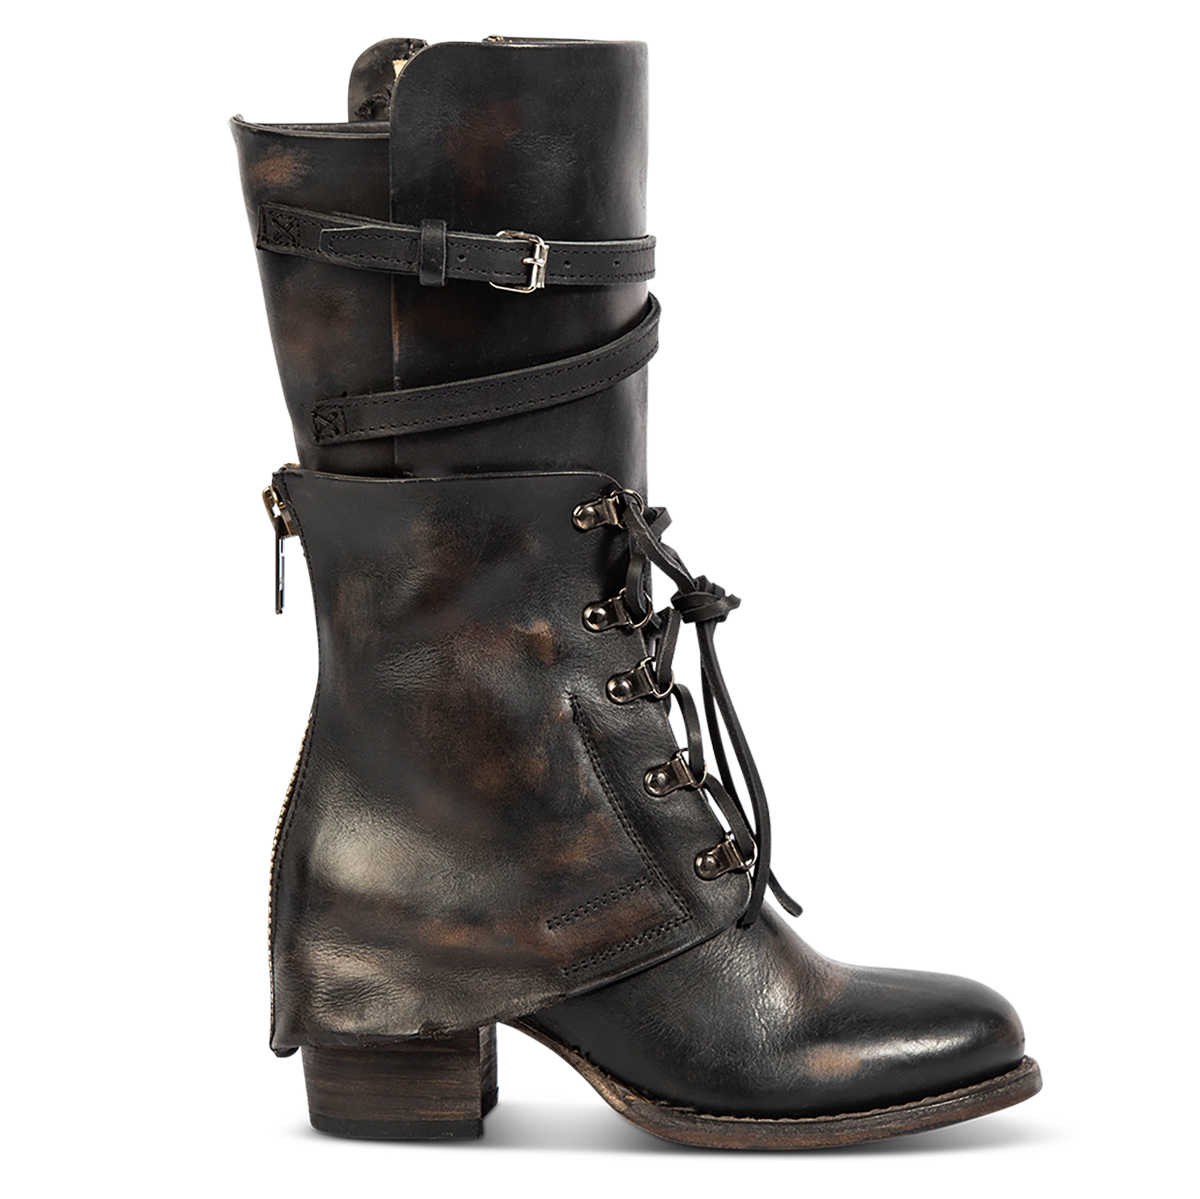 FREEBIRD women's Caboose black leather boot featuring a leather shaft overlay with adjustable front lacing, zig-zag buckling and a full inside working brass zipper